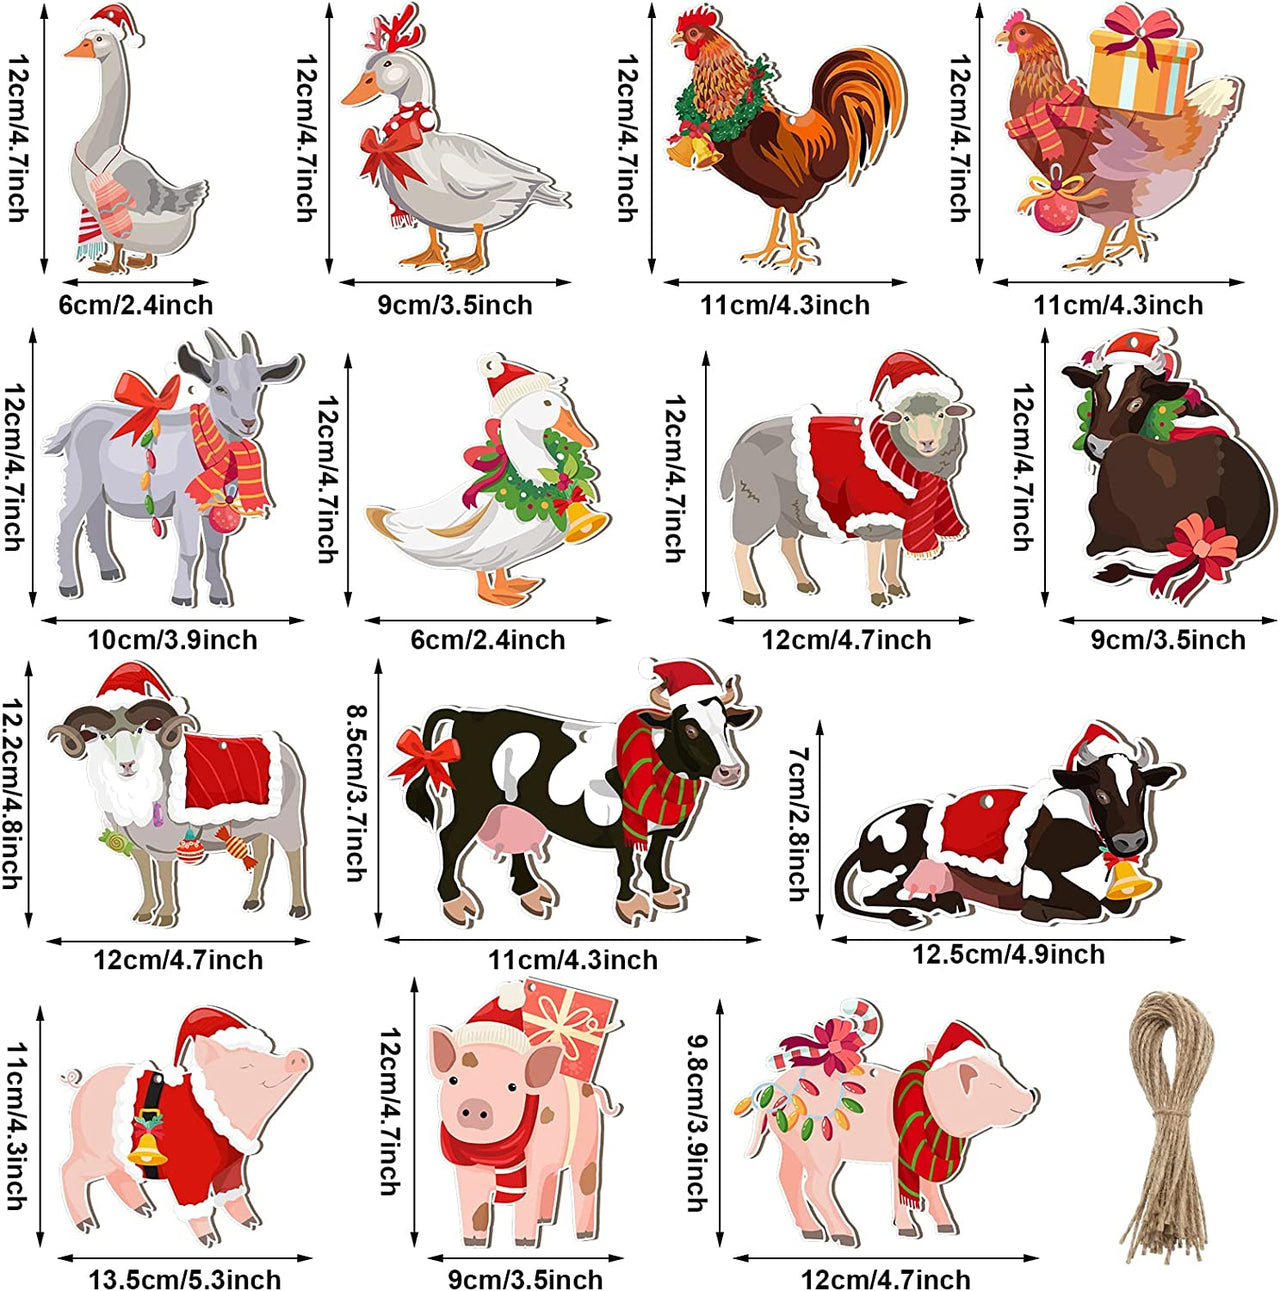 14 Pieces Christmas Farm Animals Ornament 4.7 Inch Wood Pig Chicken Sheep Duck Christmas Ornaments Country Farmhouse Holiday Decor for Christmas Tree Decoration Crafts